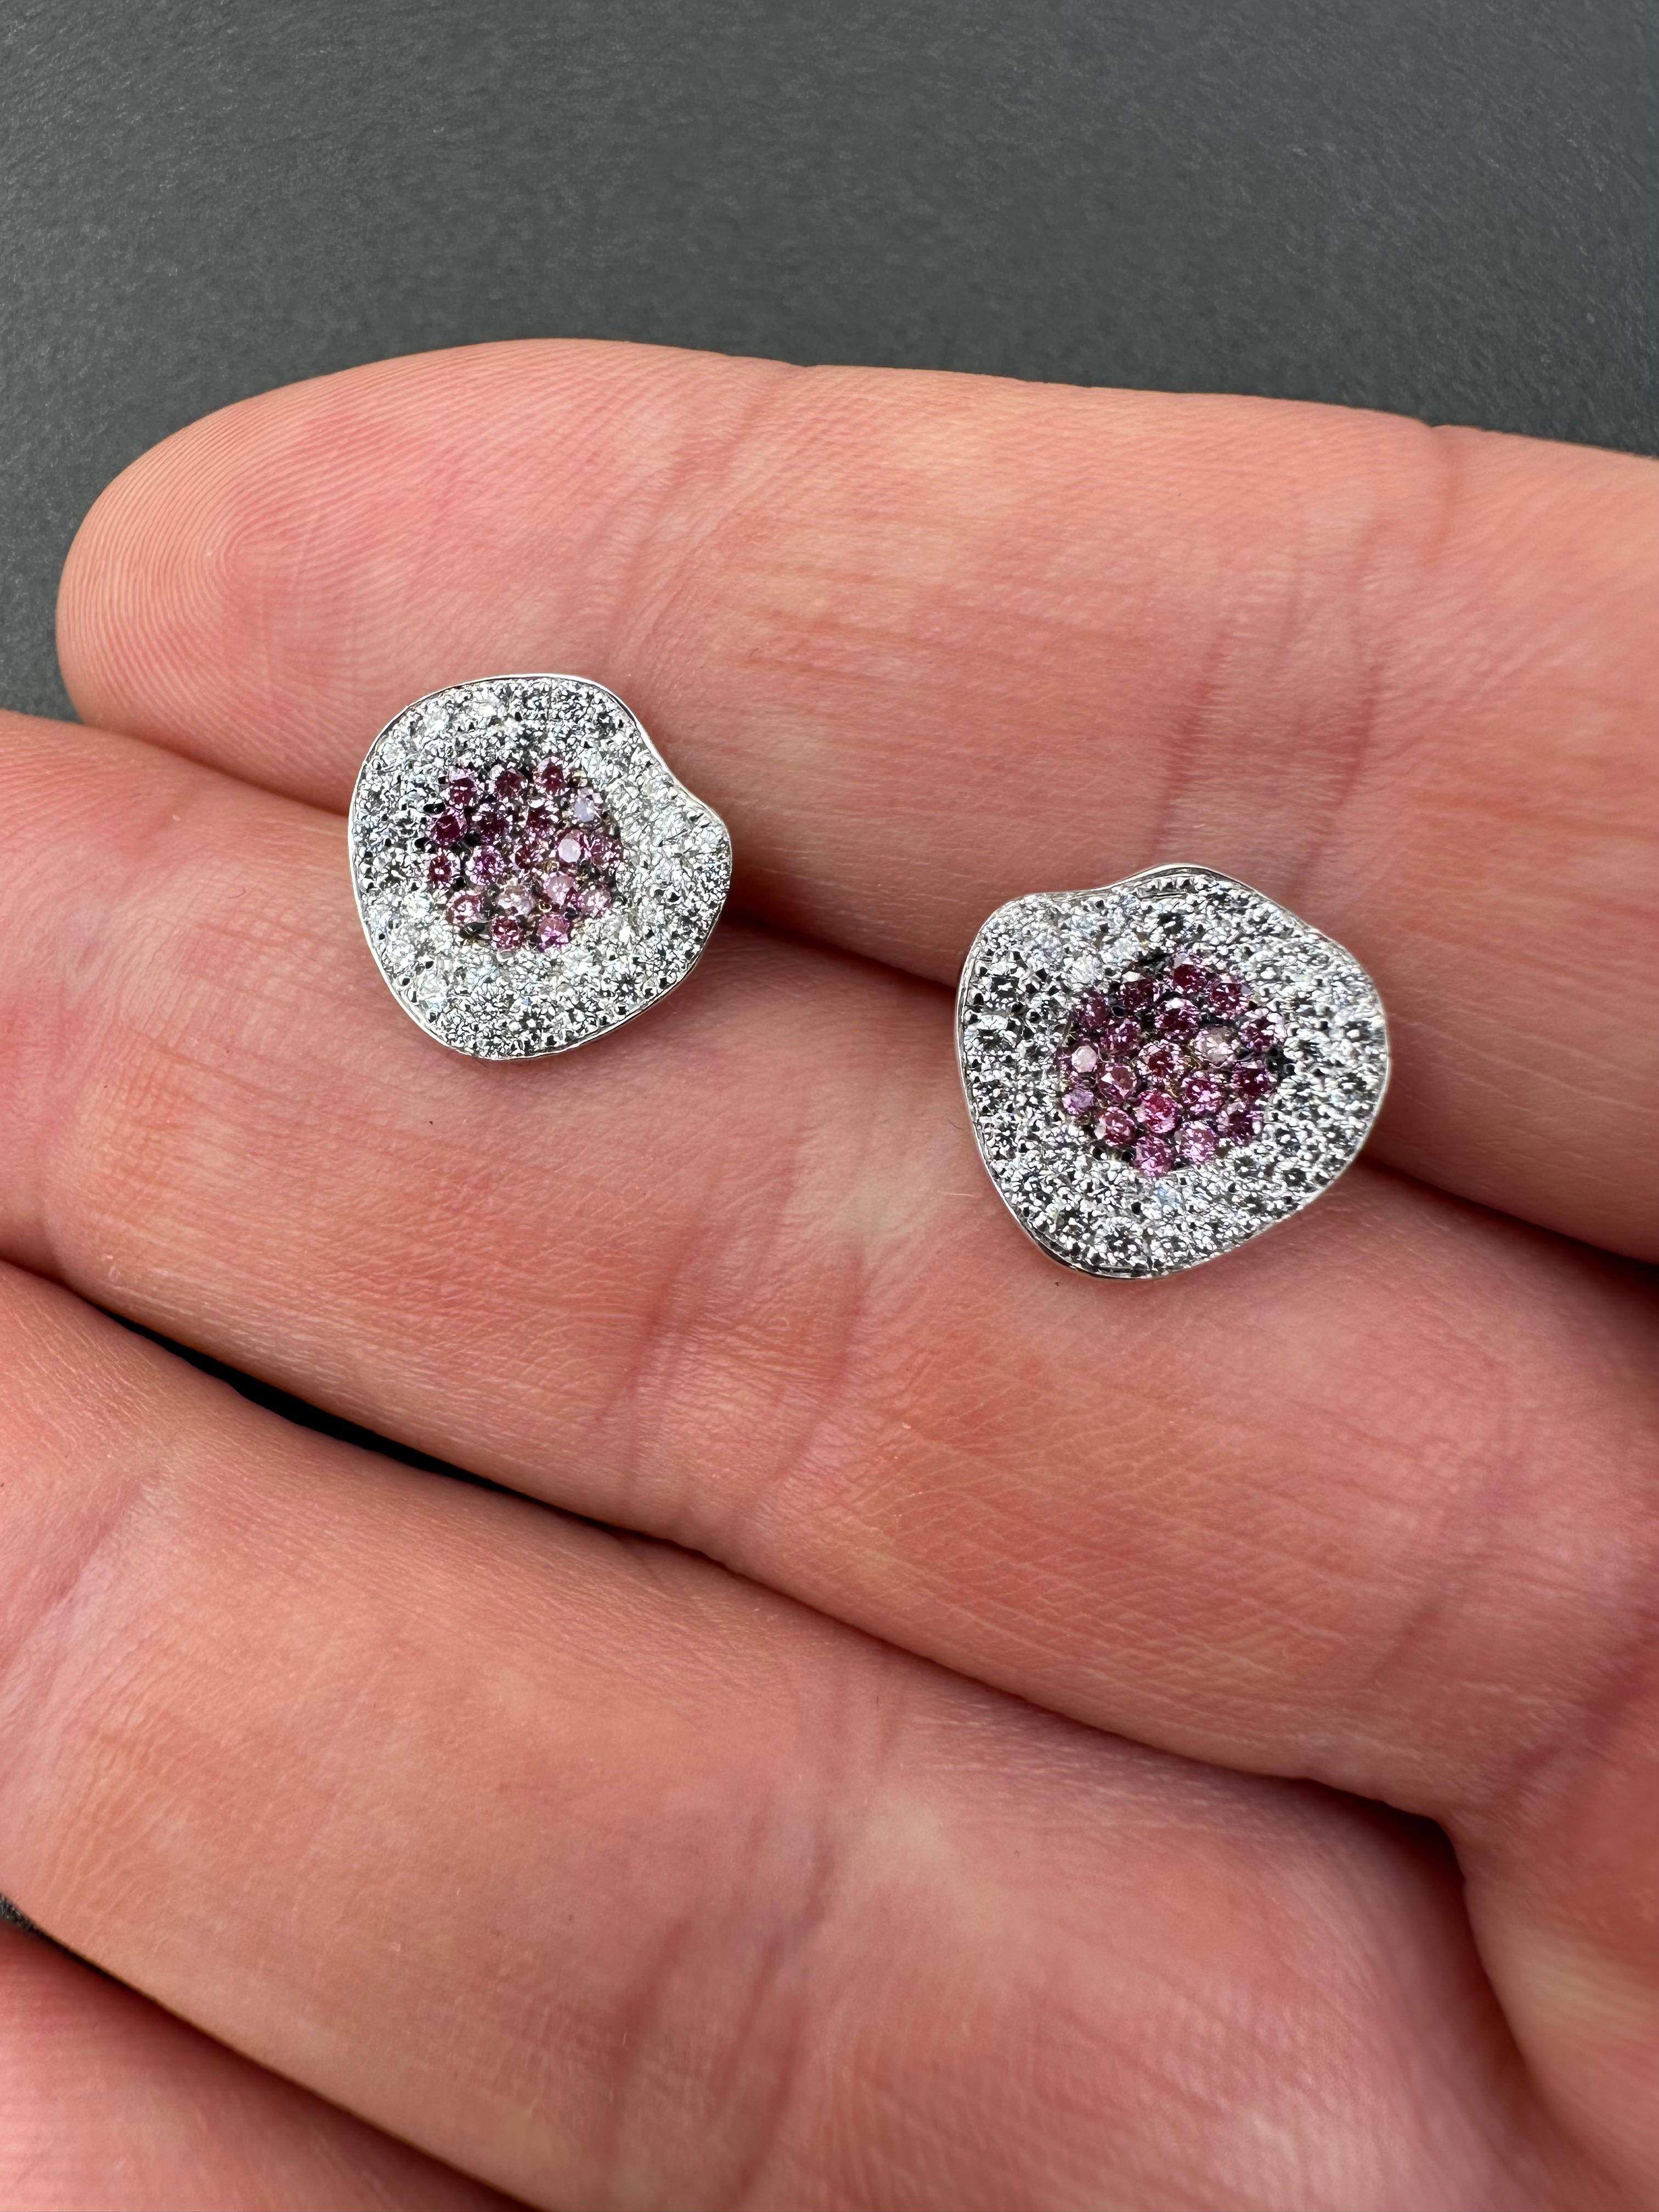 Round Cut White and Pink Diamond Stud Earrings set in White Gold